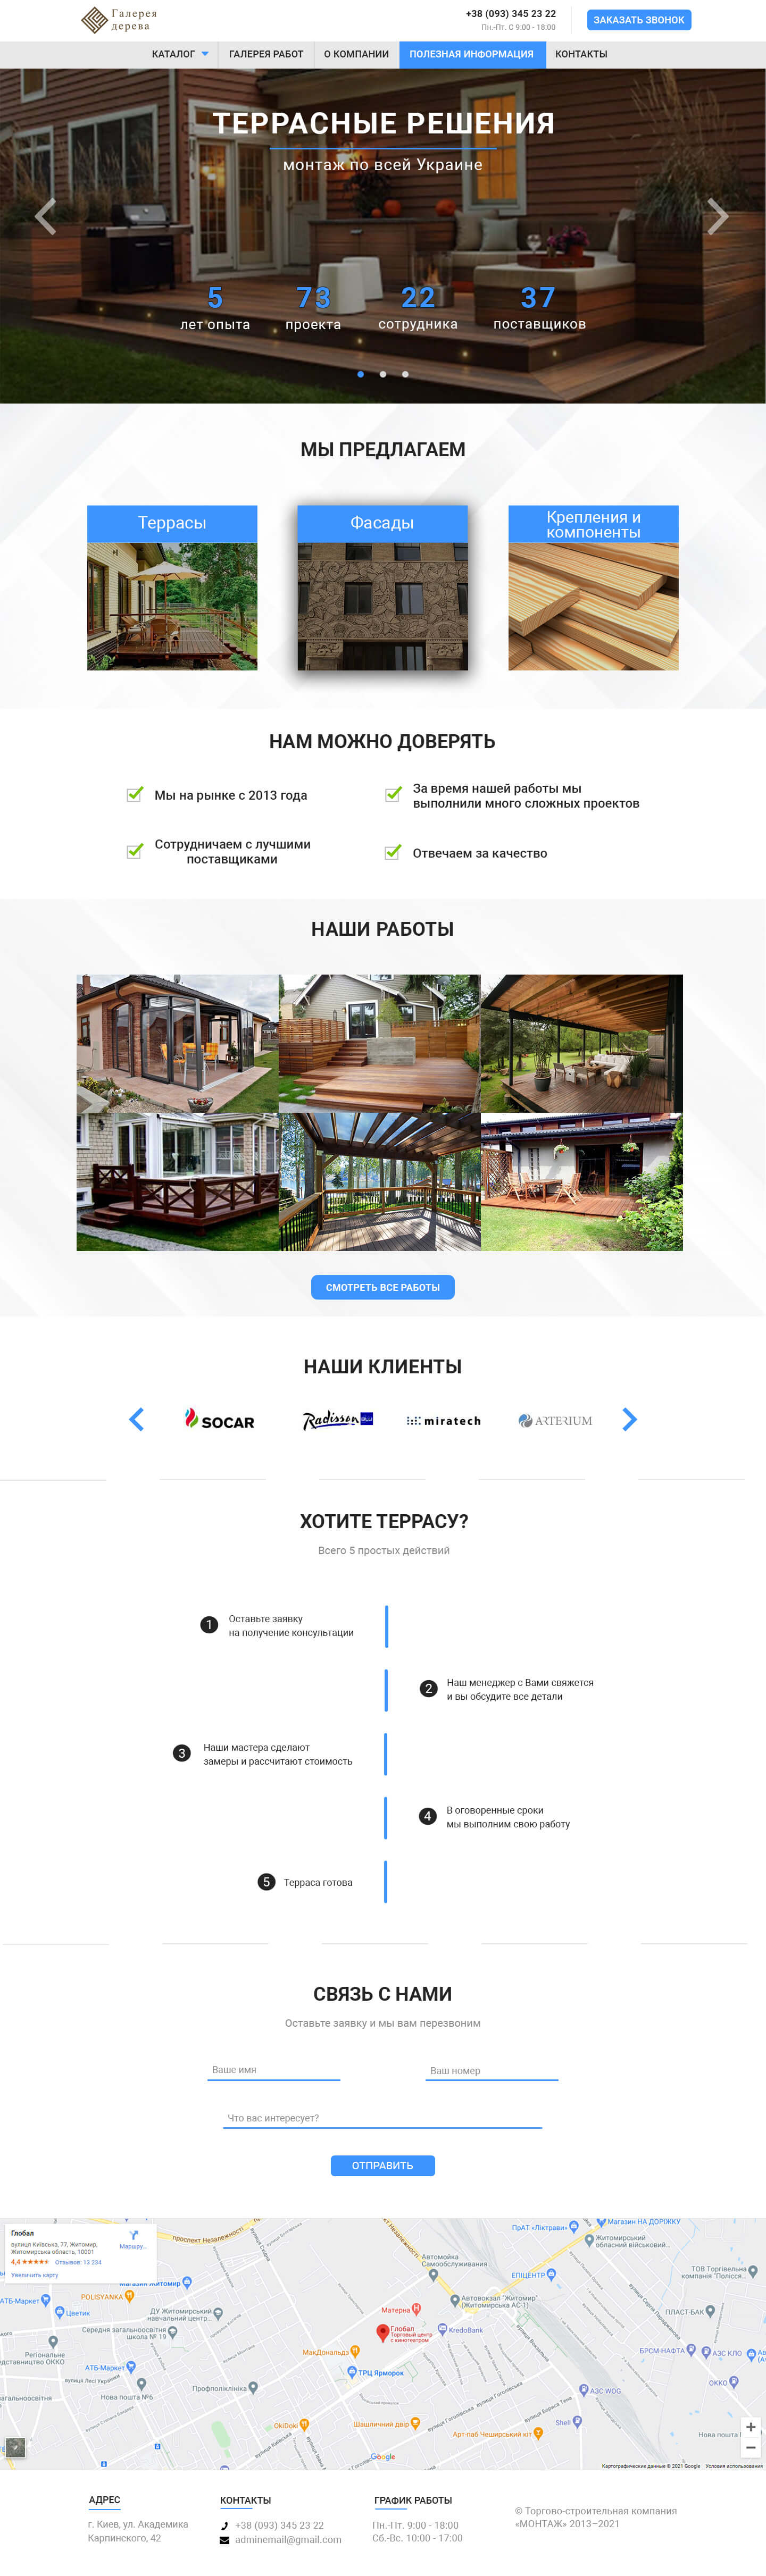 Gallery-wood - Multipage site